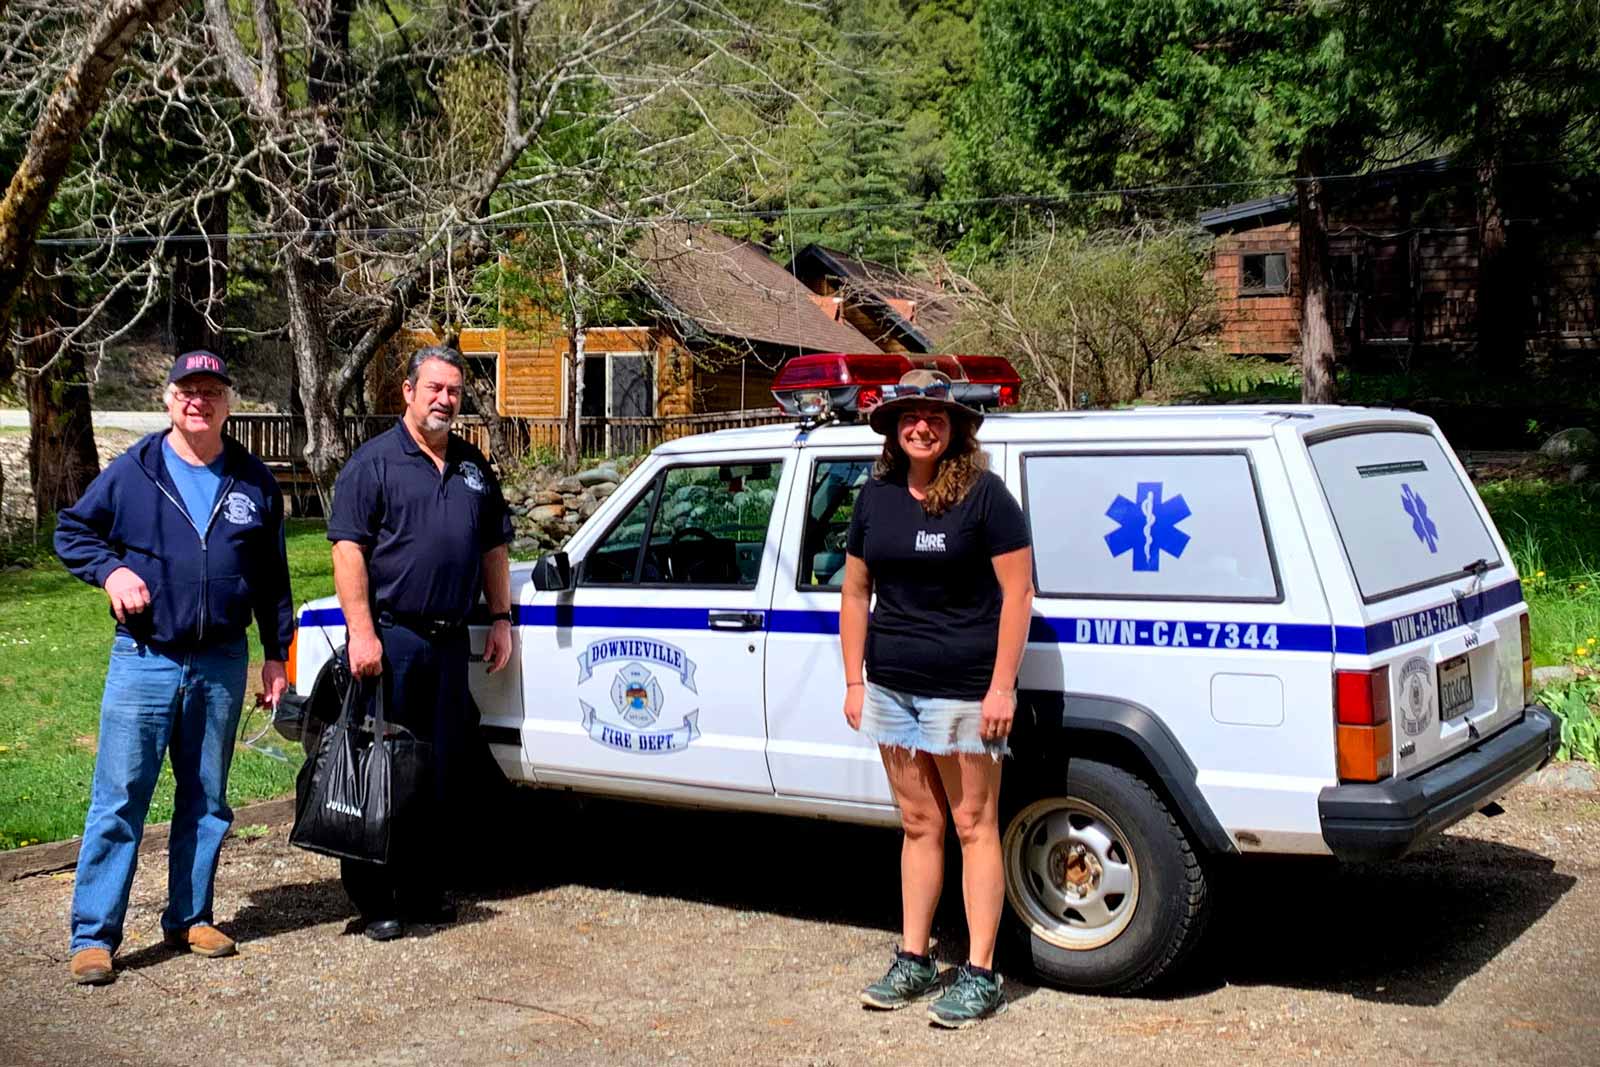 Delivering facemasks to Downieville Fire department